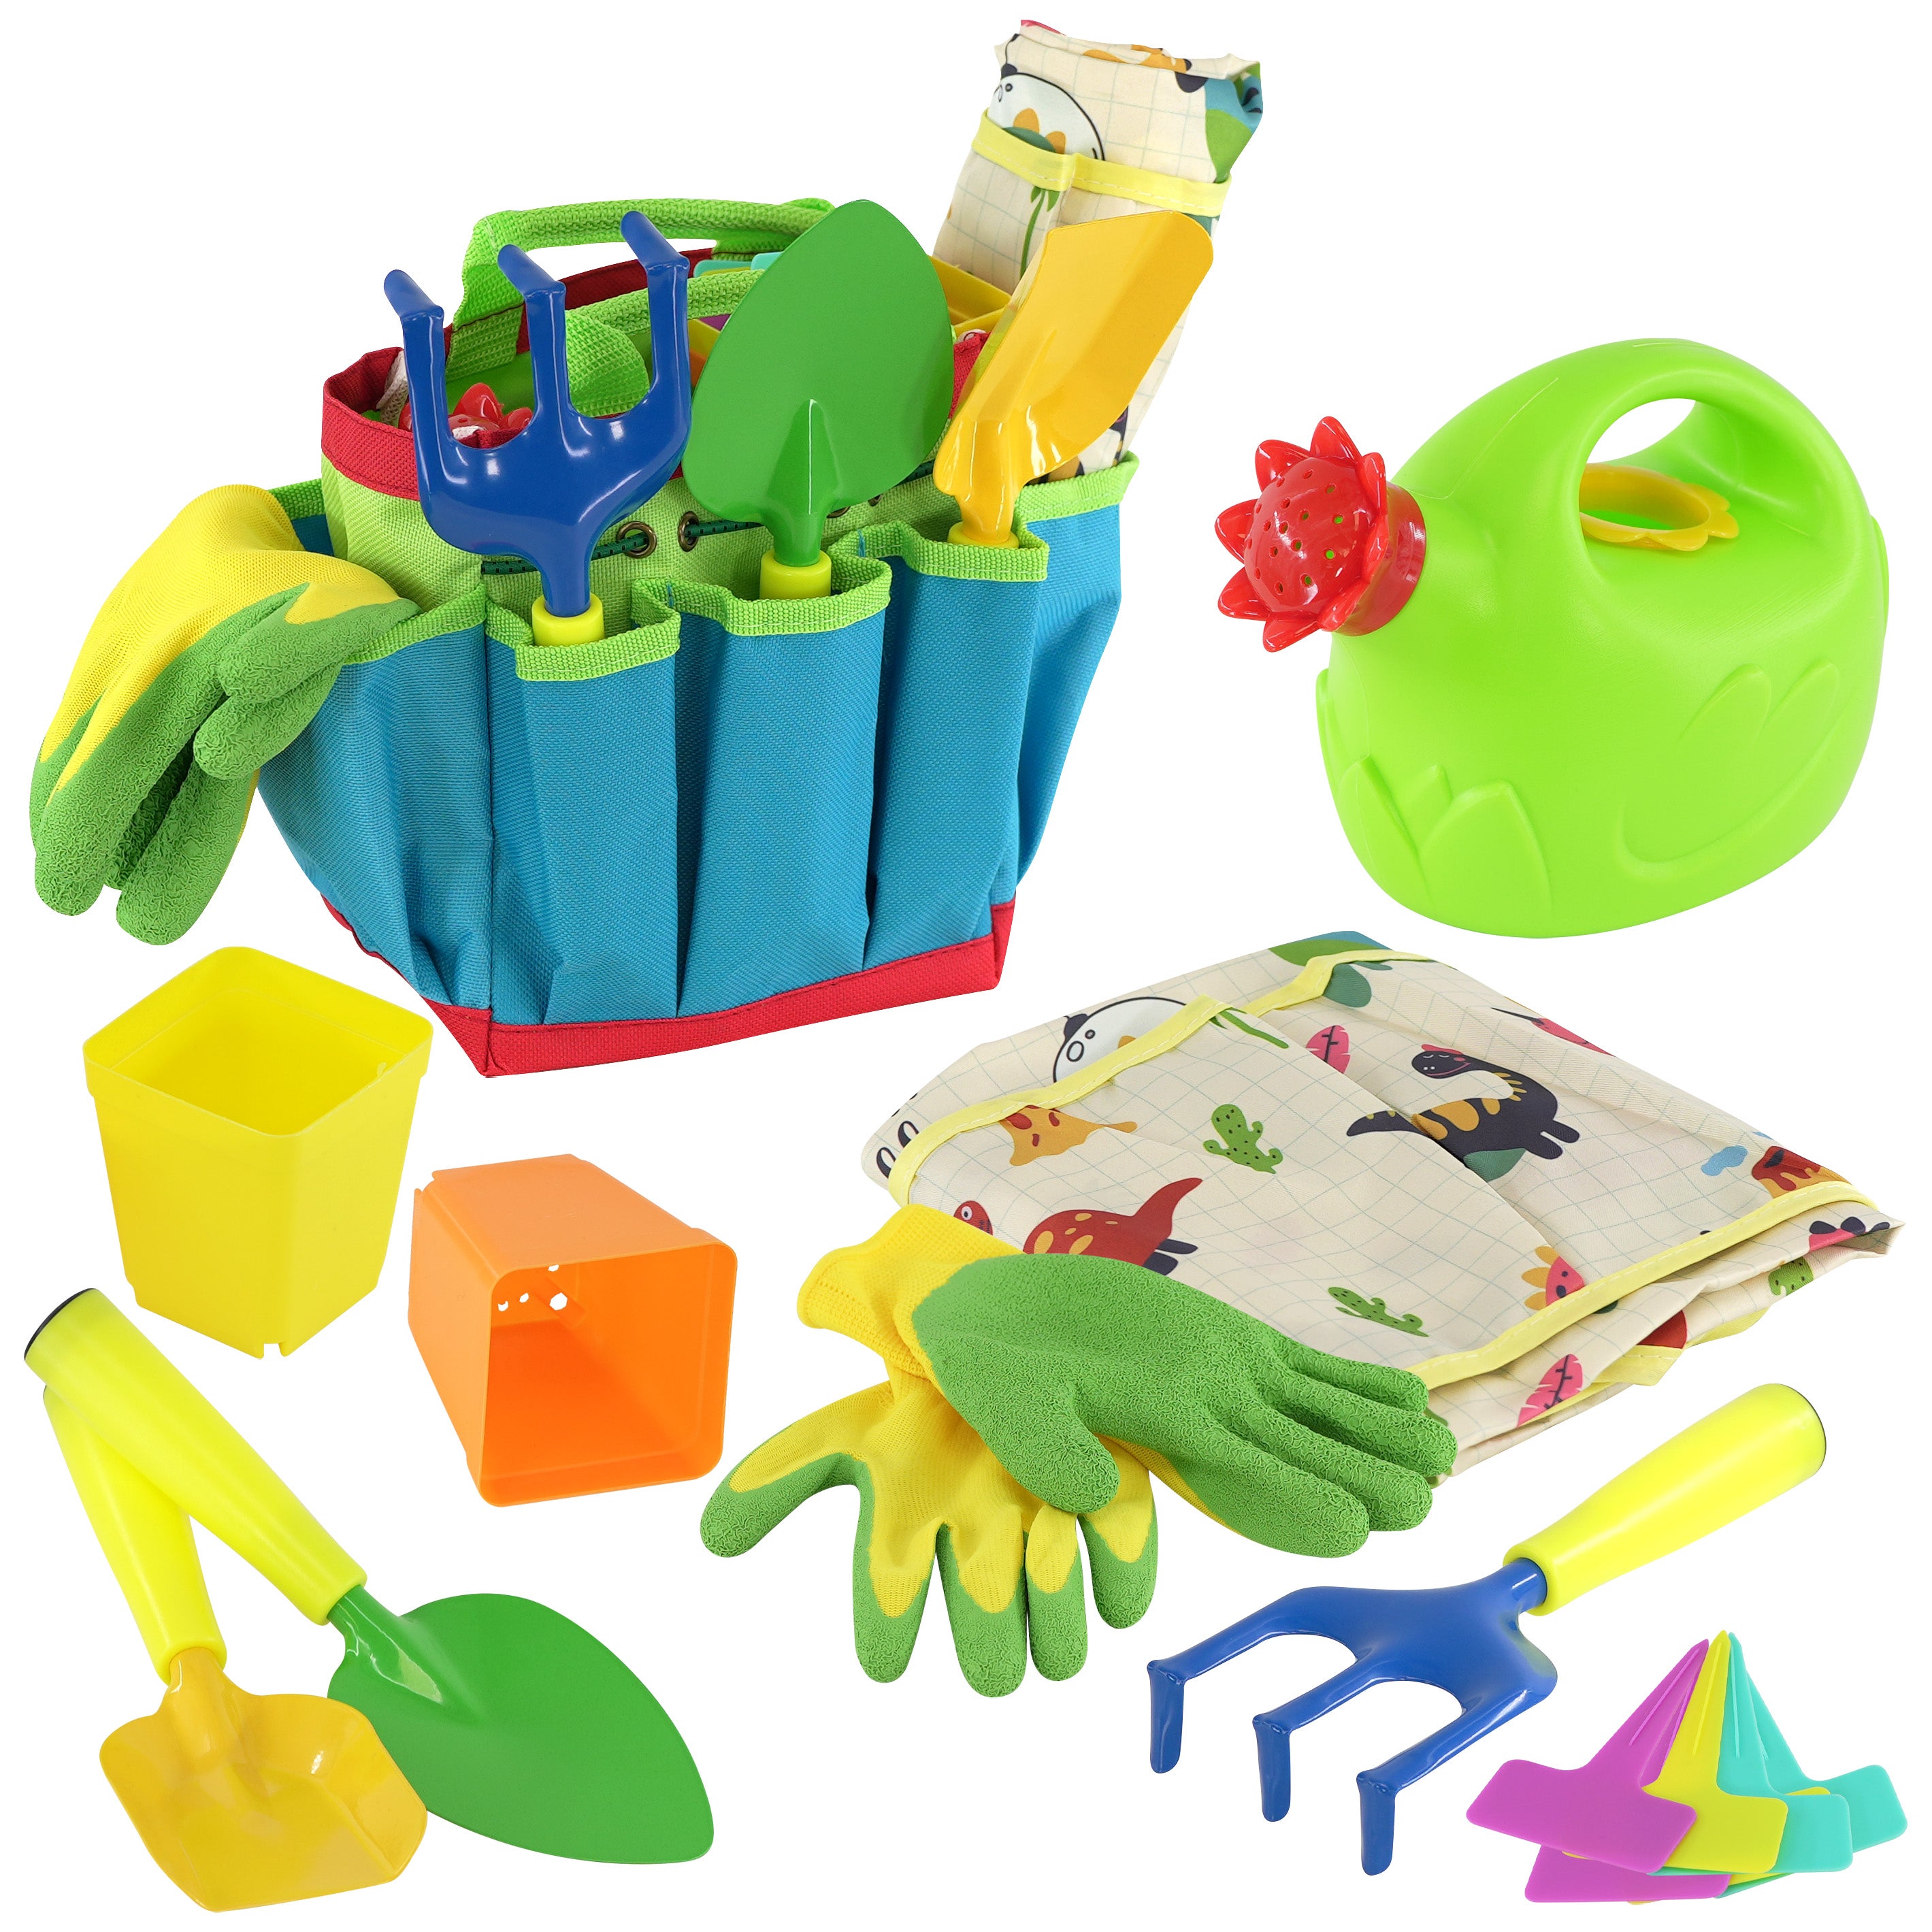 The Magic Toy Shop Sand and water table Set Of 4 Kids Garden Tools & Carry Bag